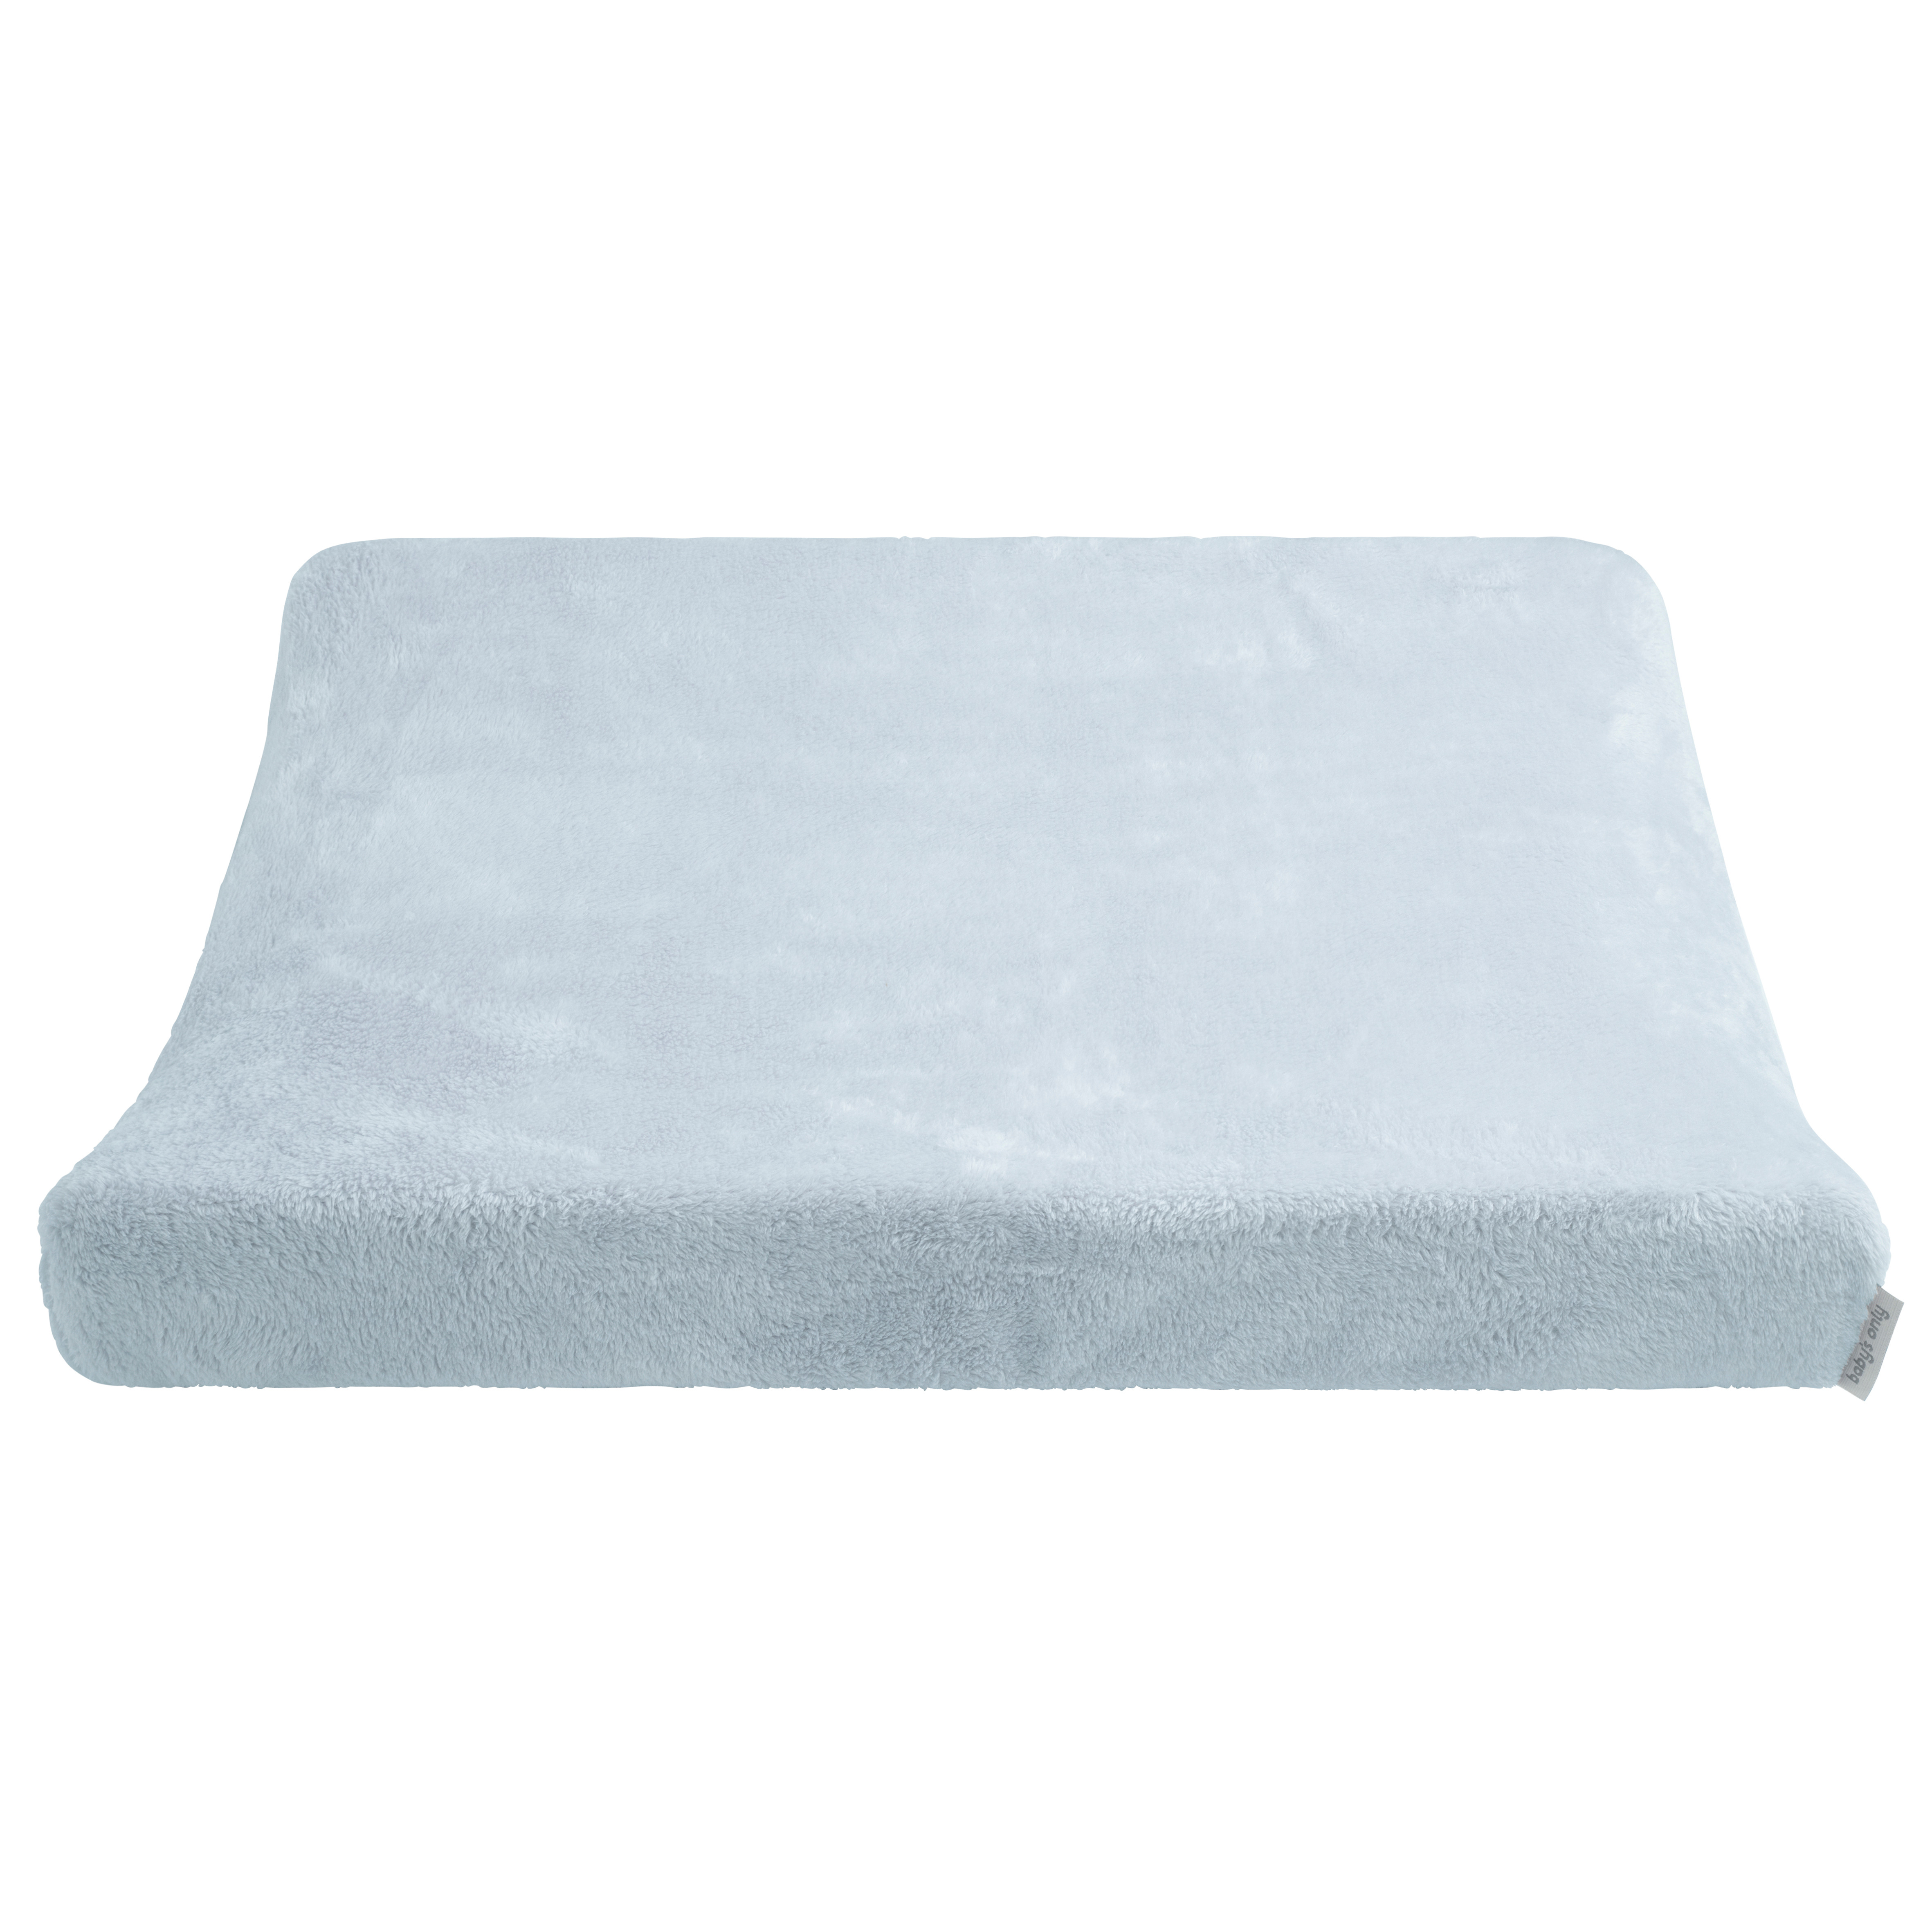 Changing pad cover Cozy misty blue - 45x70